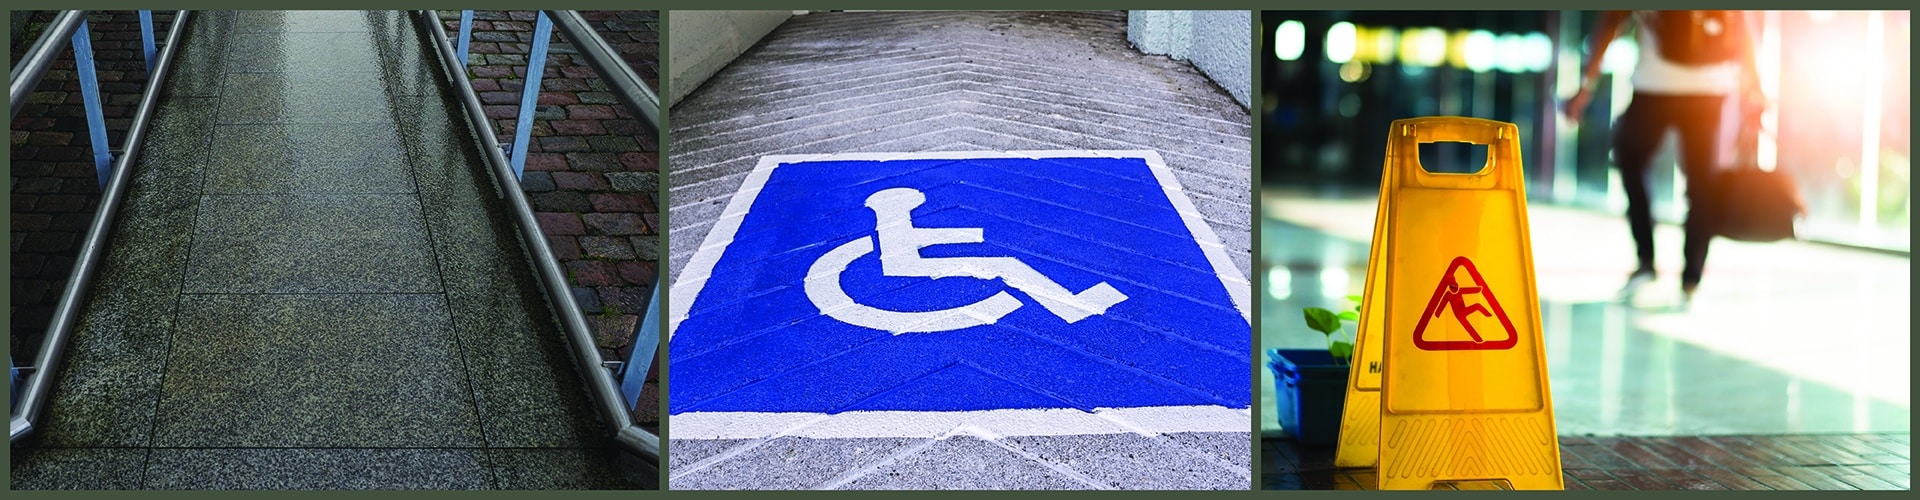 walkway, disabled sign and slippery sign